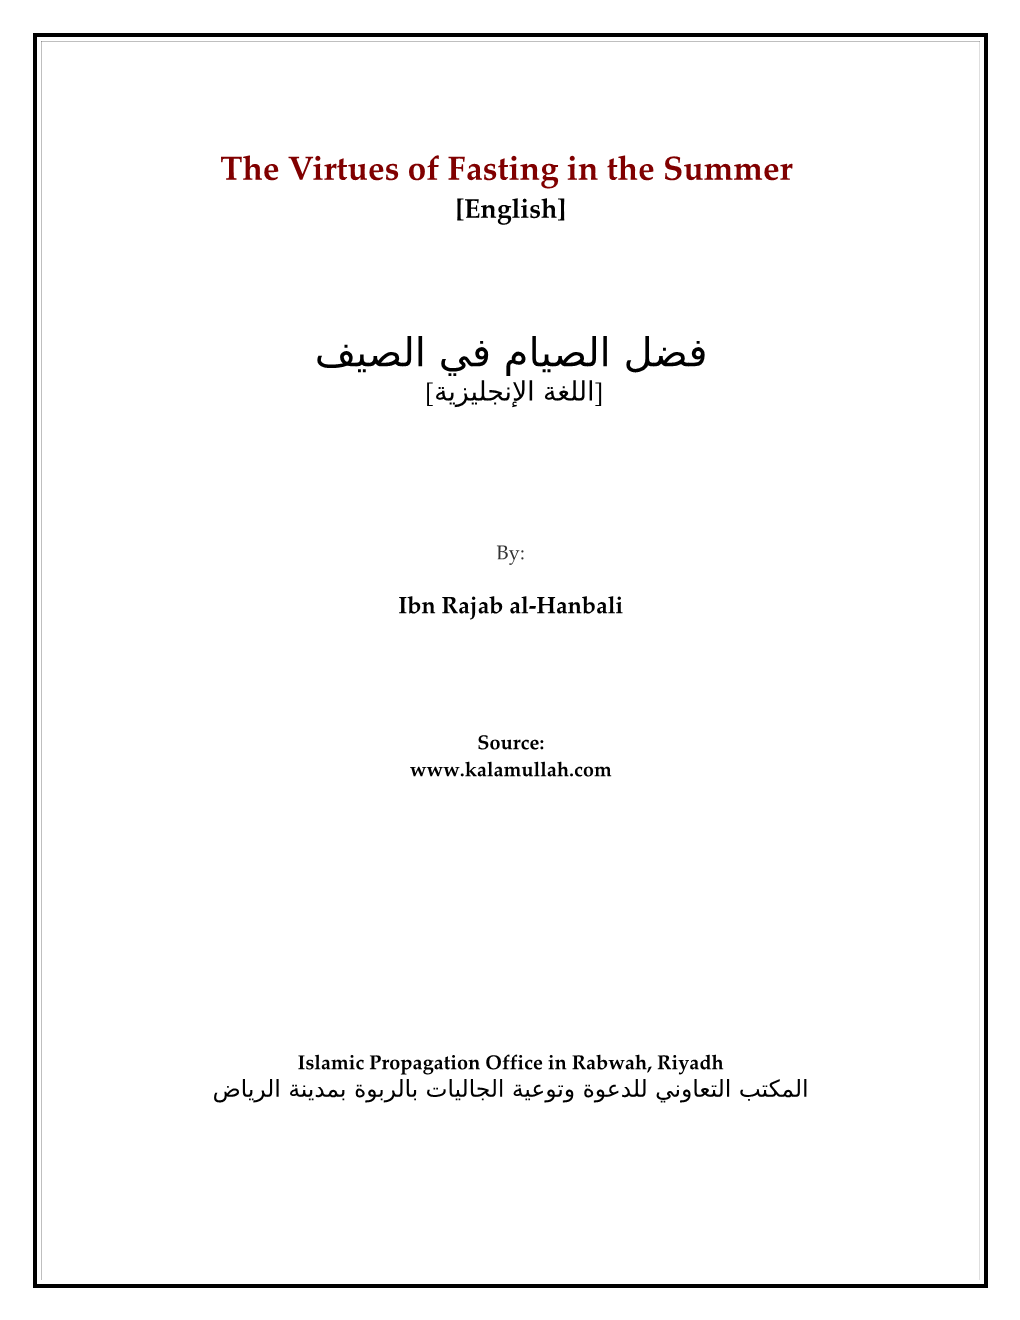 The Virtues of Fasting in the Summer